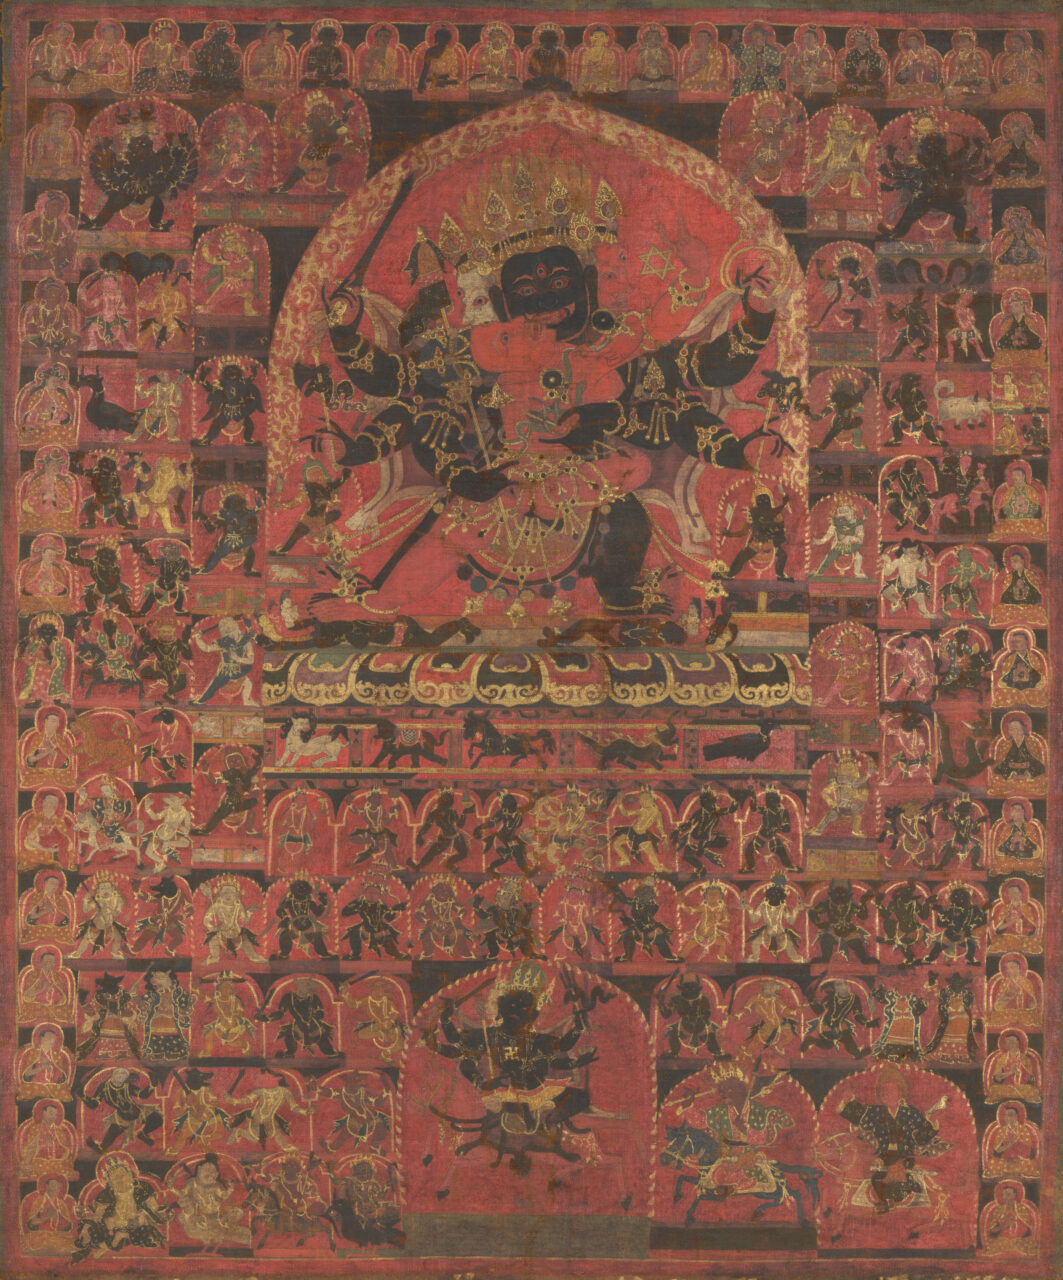 Fearsome deity locked in embrace with consort amid multitude of deity portraits arranged in grid pattern